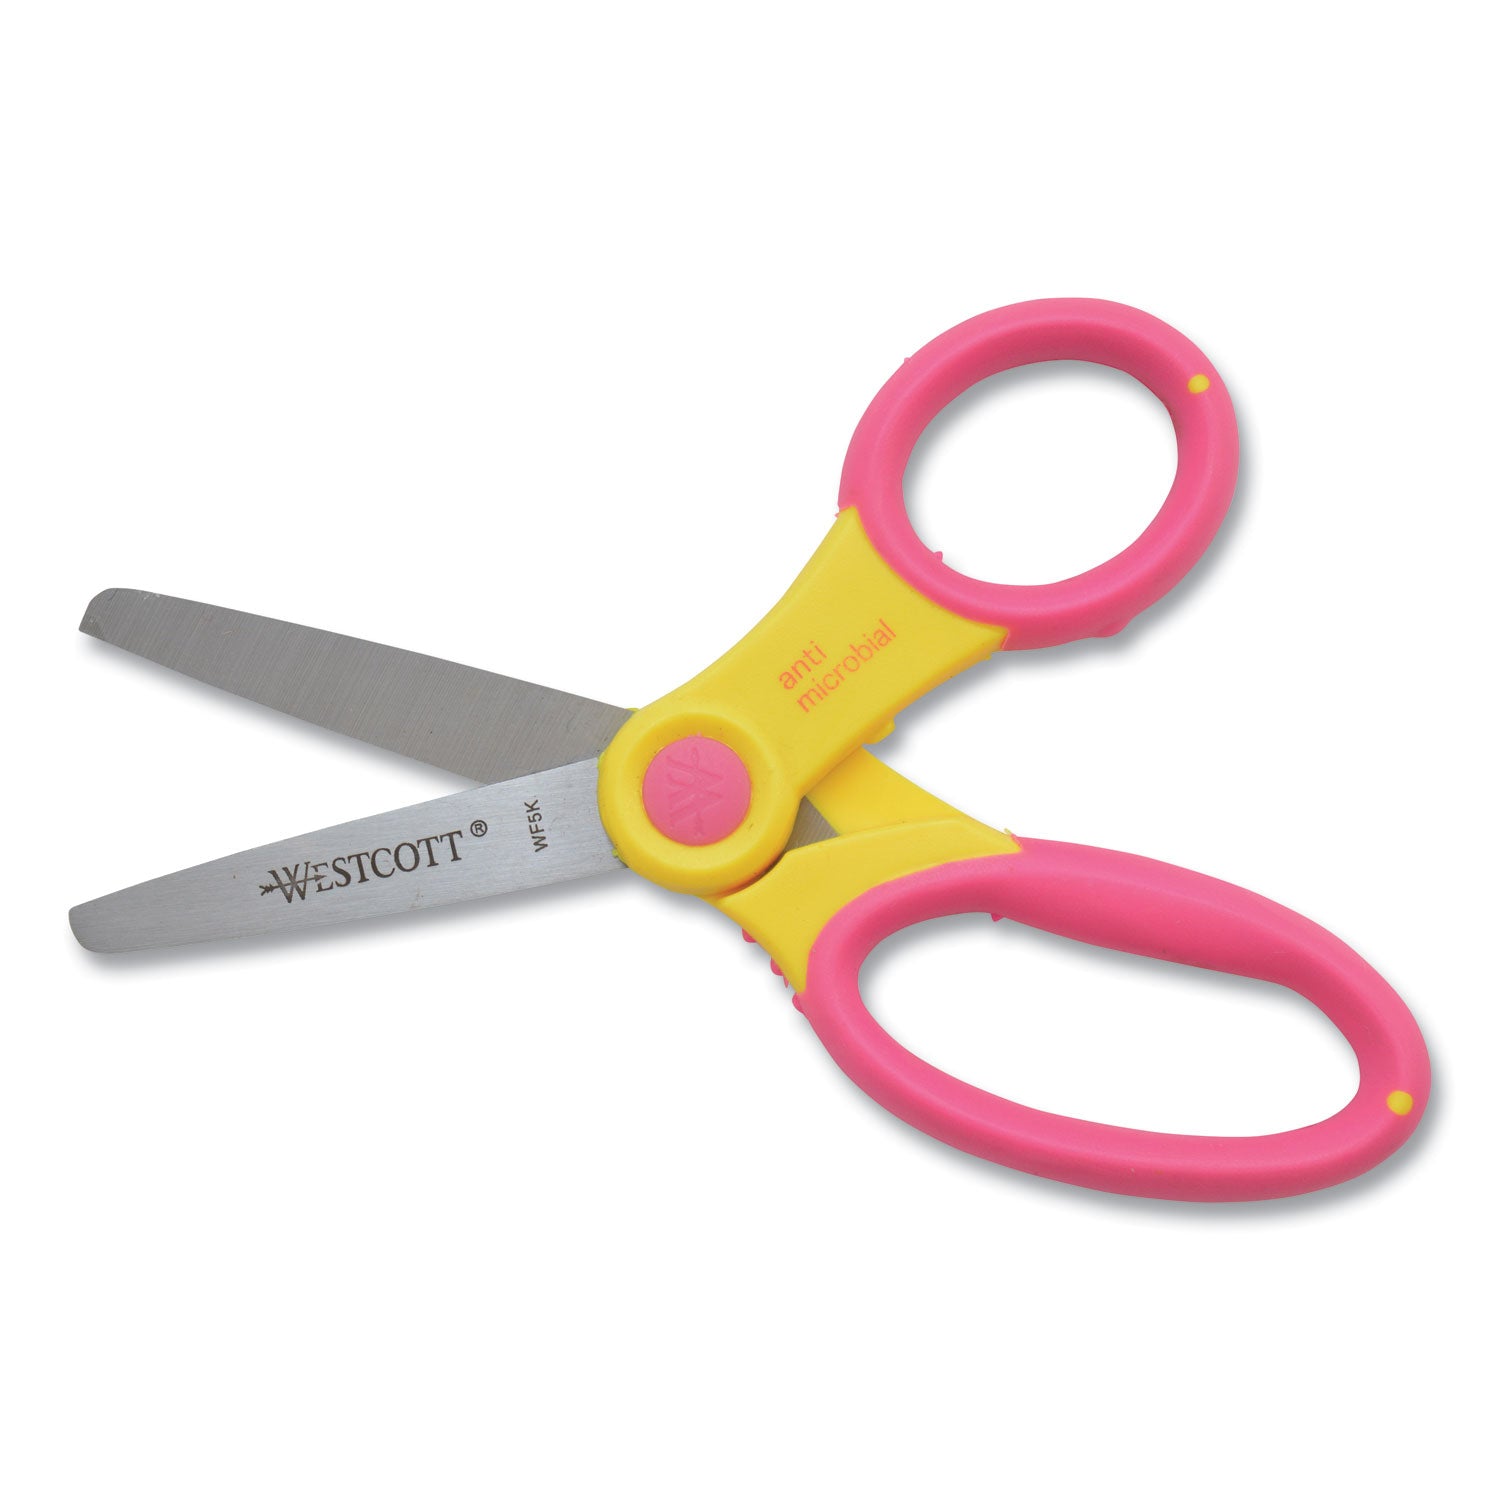 Ultra Soft Handle Scissors w/Antimicrobial Protection, Rounded Tip, 5" Long, 2" Cut Length, Randomly Assorted Straight Handle - 